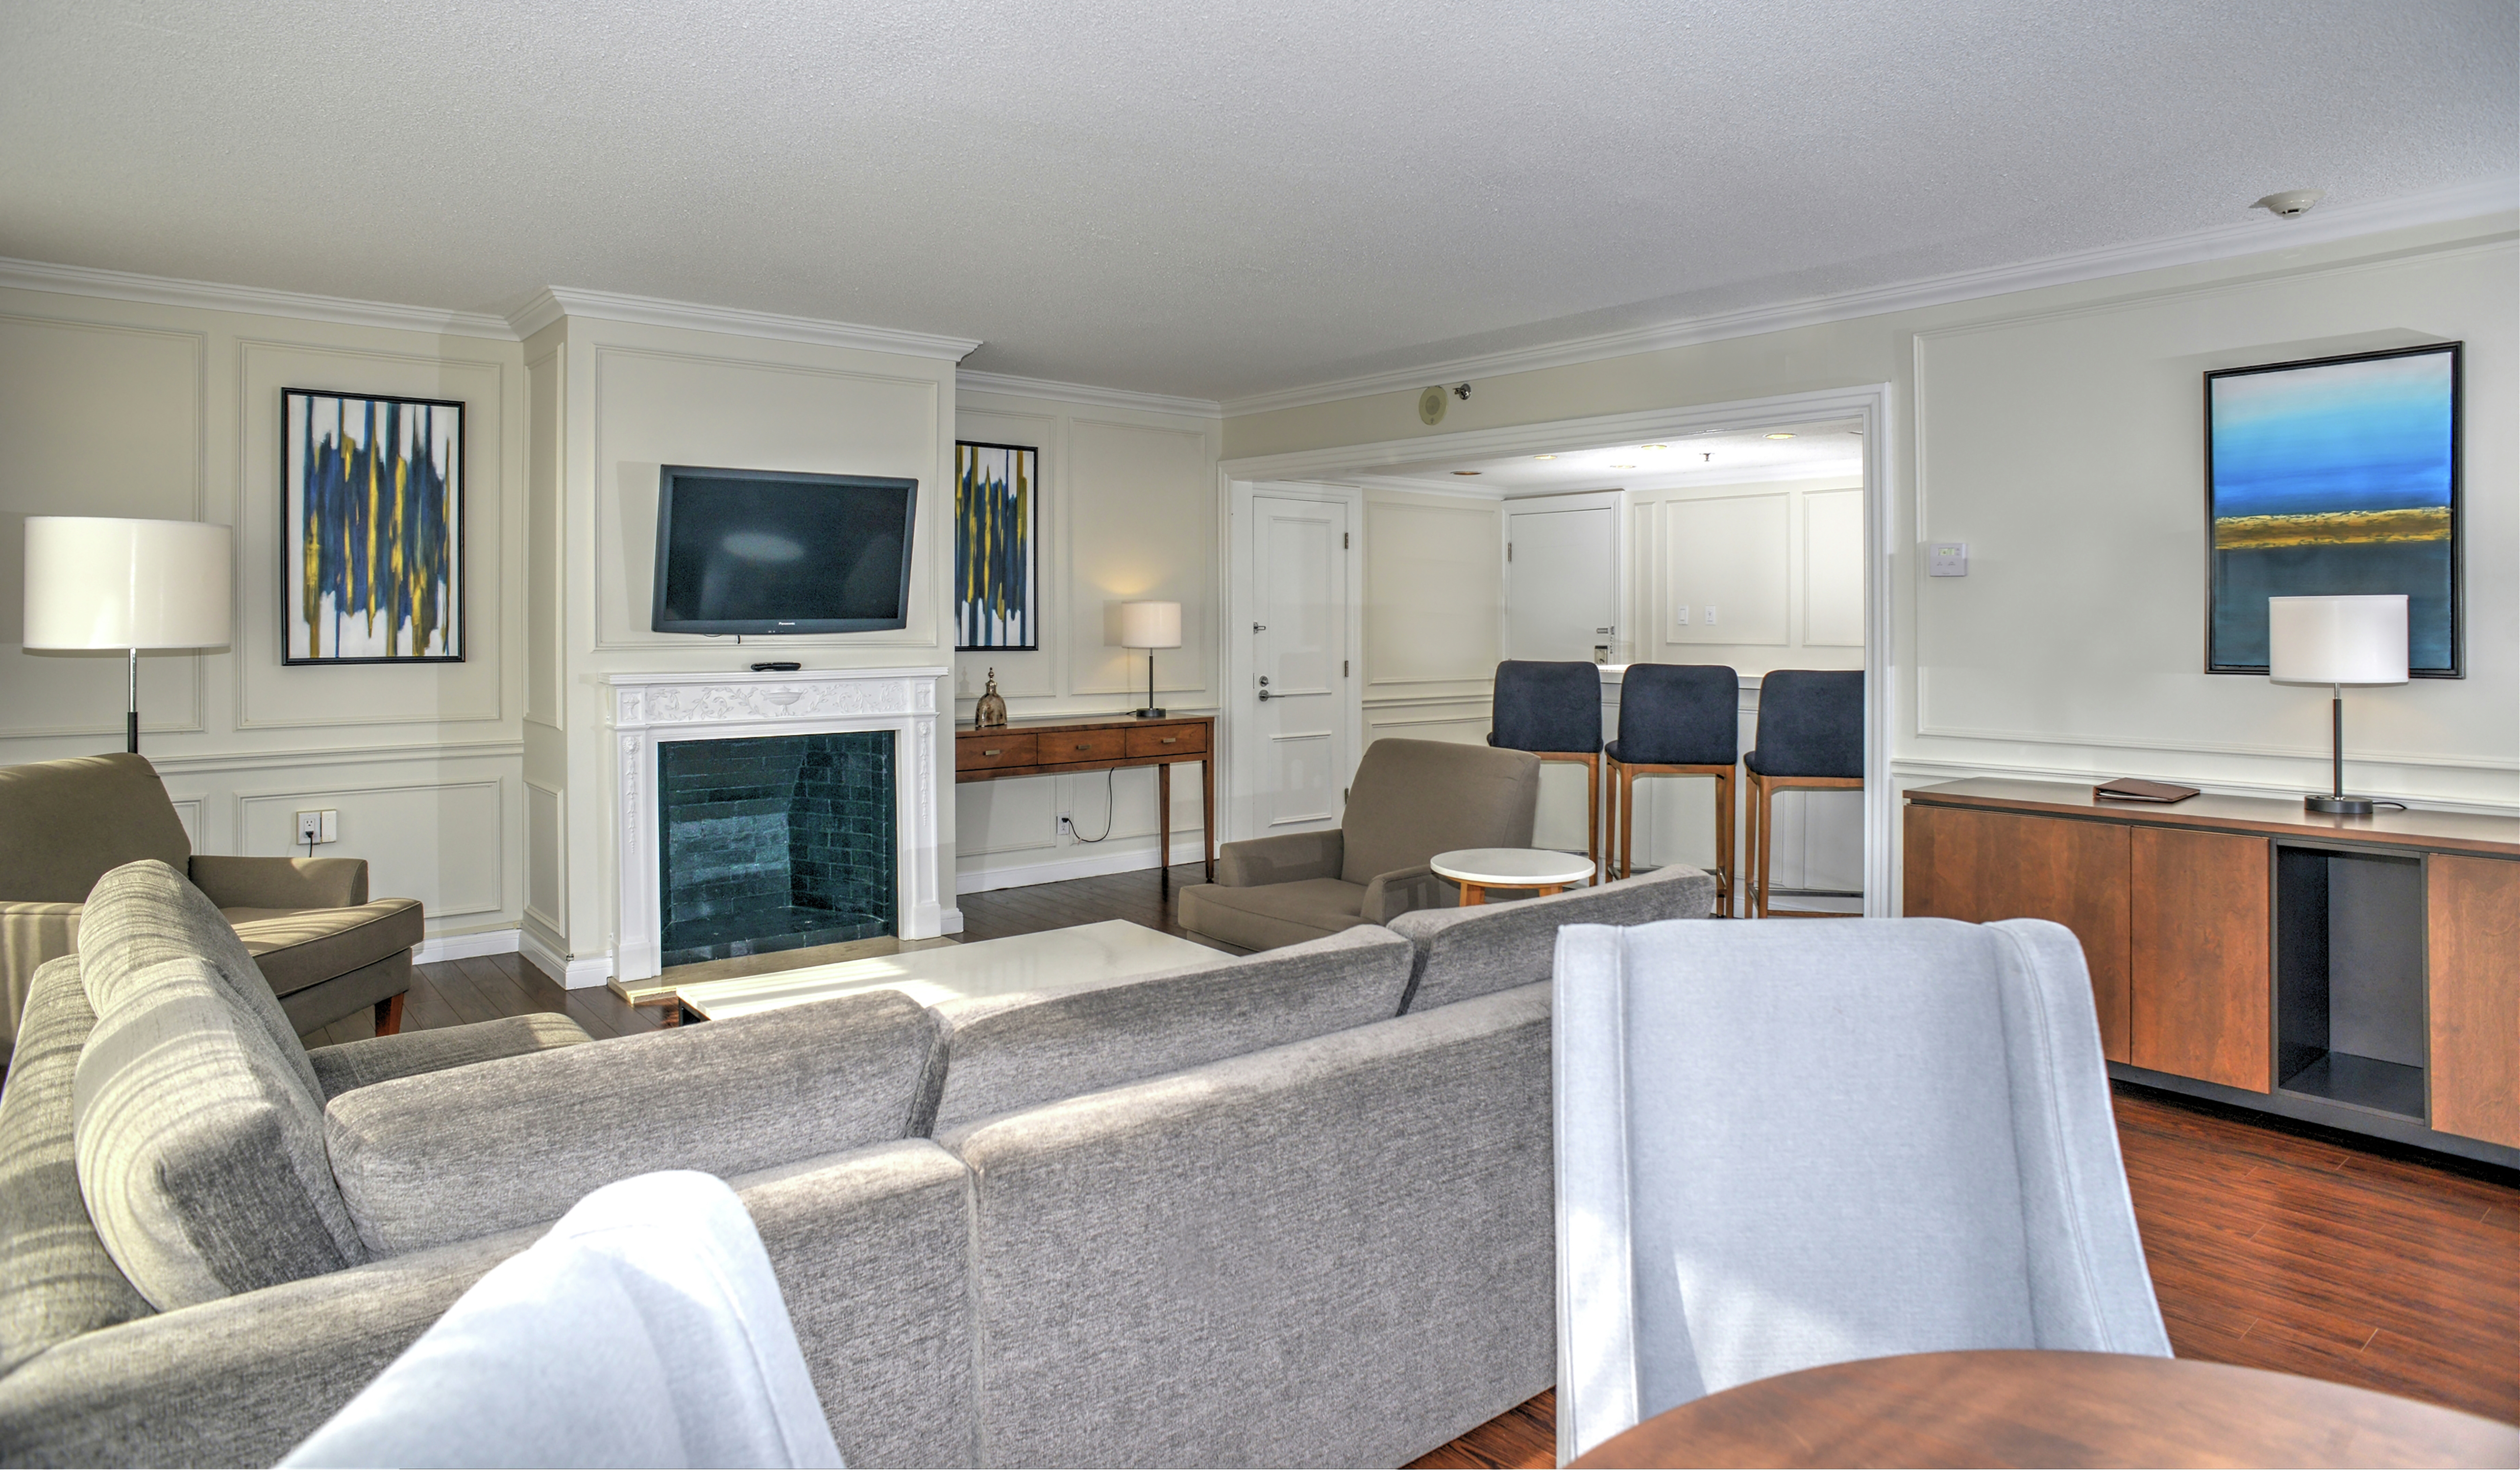 Prime Minister Suite Living Area with Sofa, Fireplace, and Wall-Mounted TV